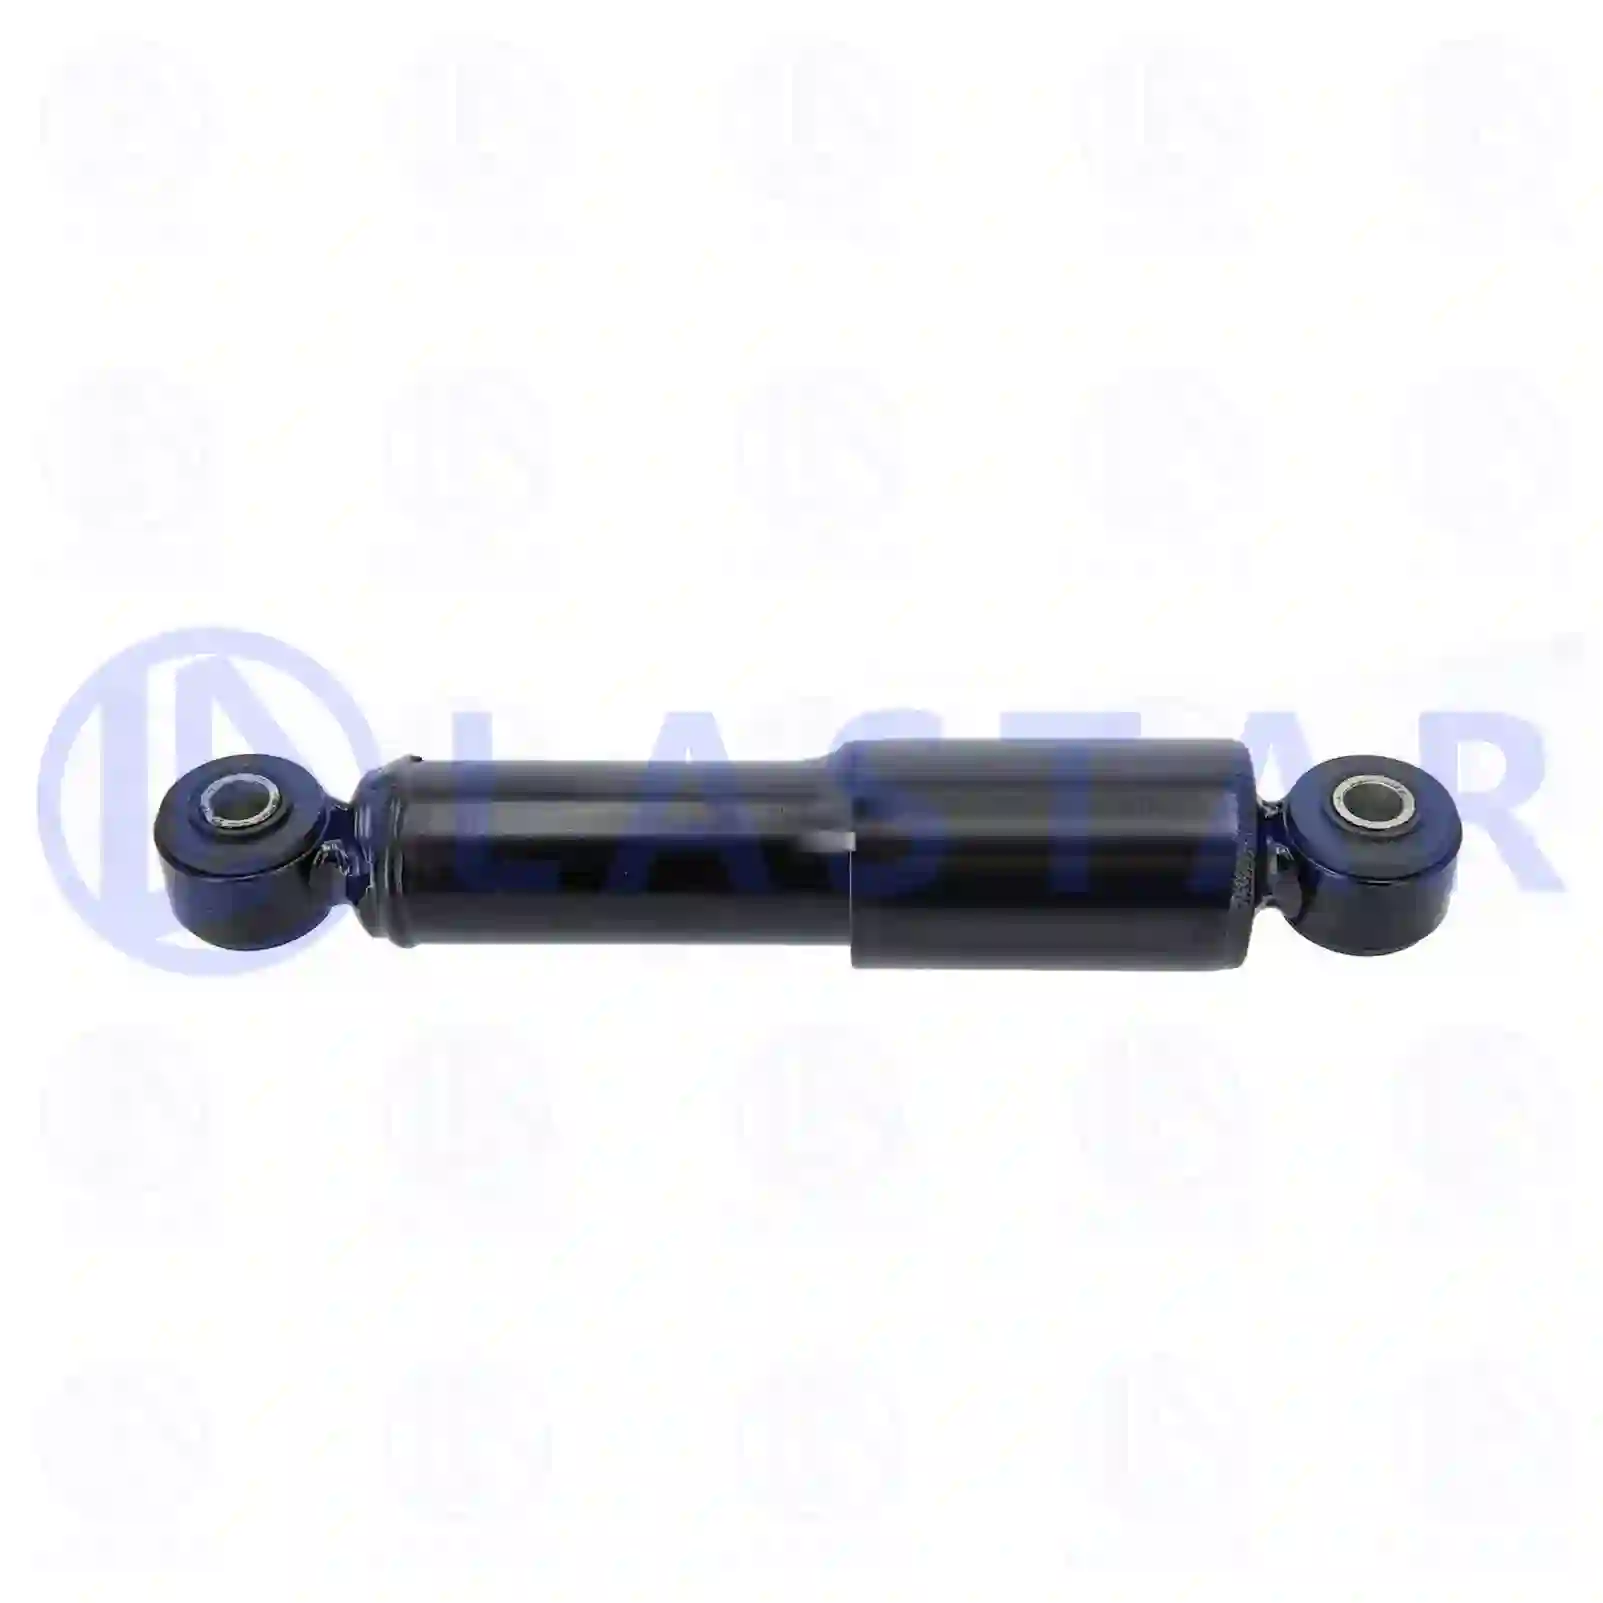 Cabin shock absorber, 77735618, 500370248, 504227 ||  77735618 Lastar Spare Part | Truck Spare Parts, Auotomotive Spare Parts Cabin shock absorber, 77735618, 500370248, 504227 ||  77735618 Lastar Spare Part | Truck Spare Parts, Auotomotive Spare Parts